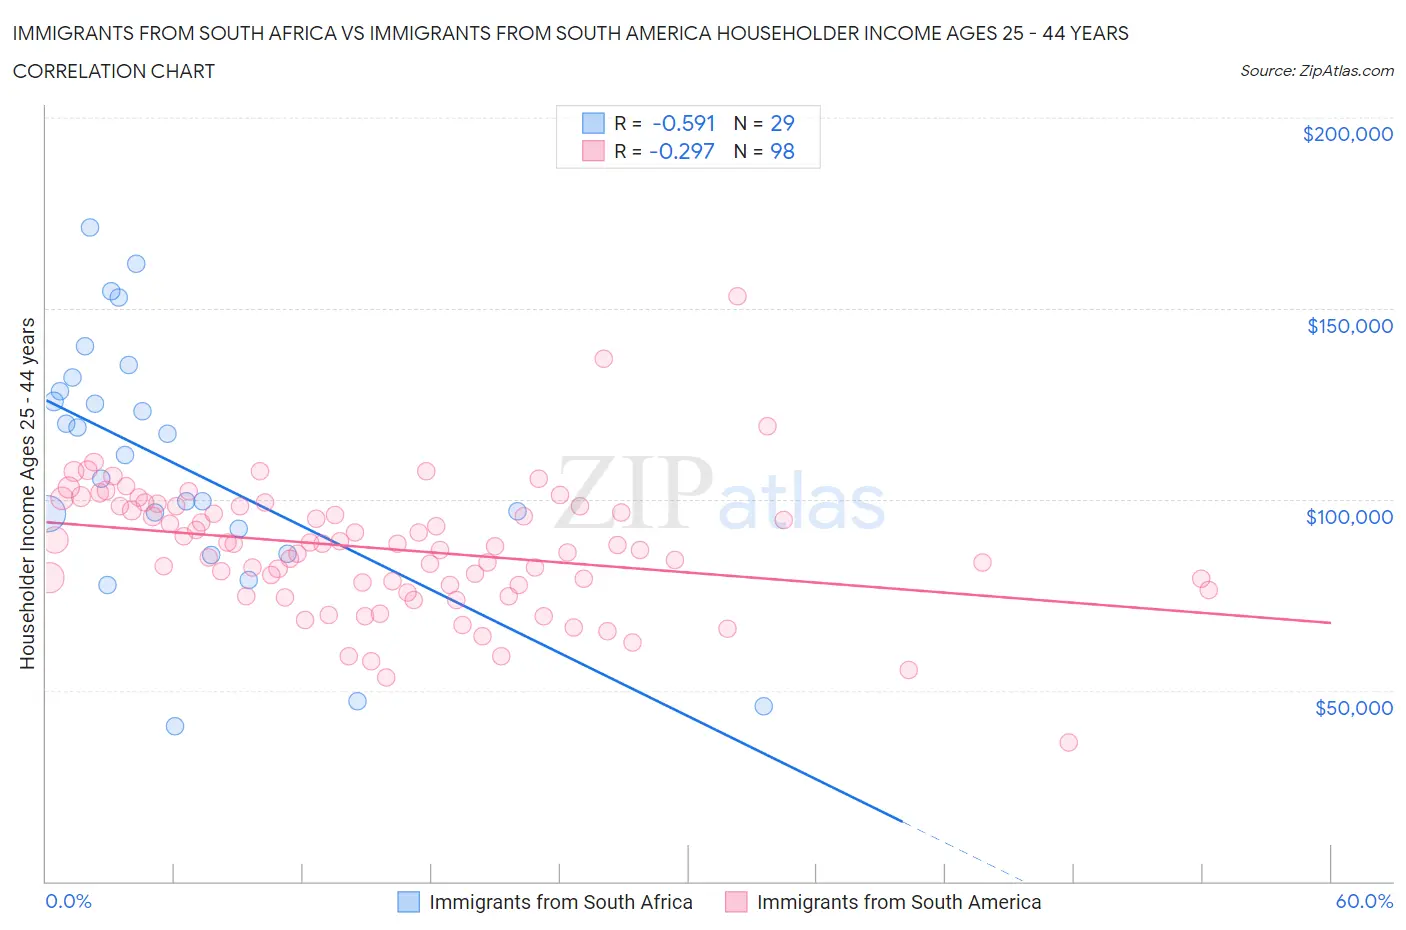 Immigrants from South Africa vs Immigrants from South America Householder Income Ages 25 - 44 years